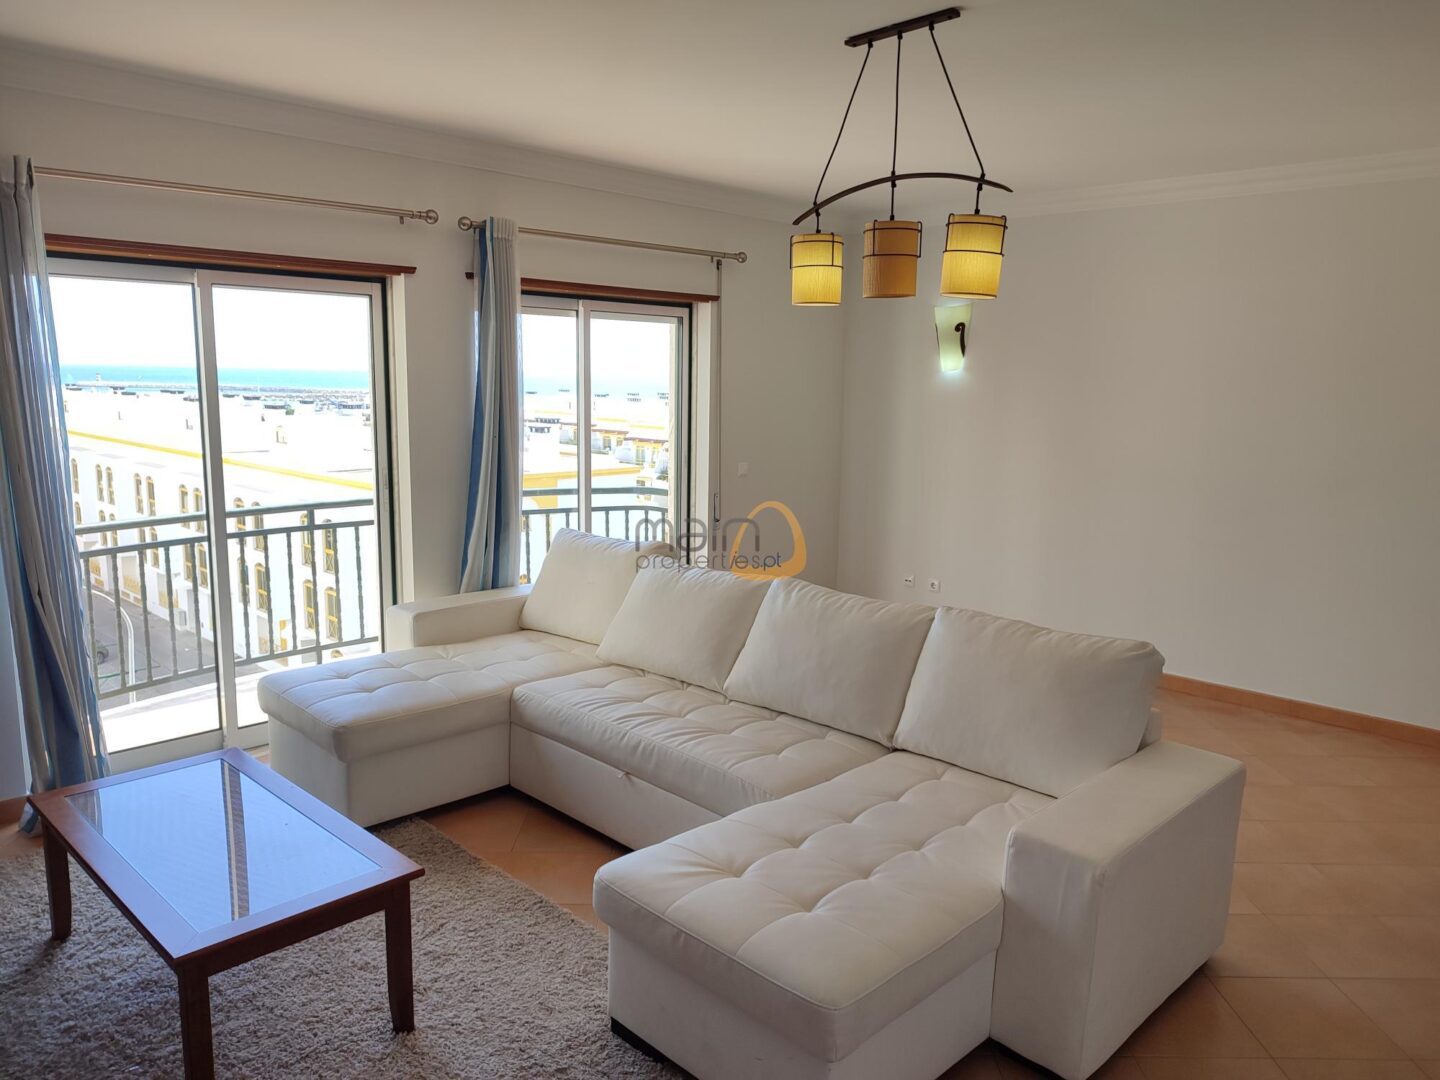 3-bedroom-apartment-with-sea-view-in-quarteira-algarve-portugal-5